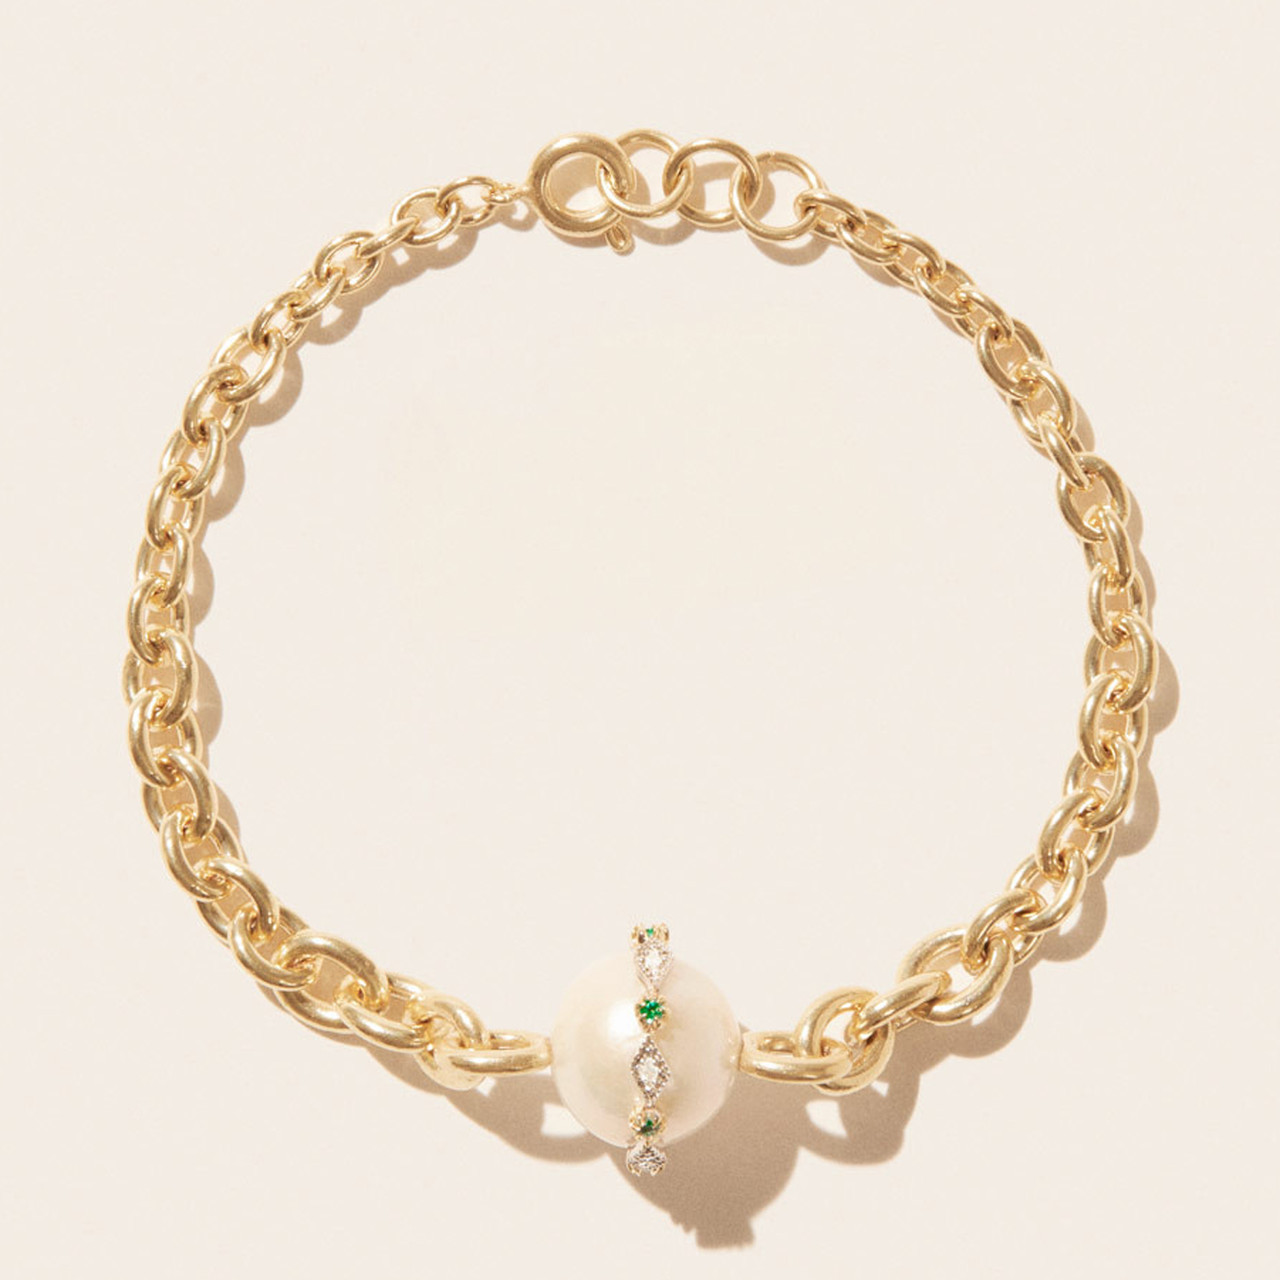 Chelsea N°3 9ct Yellow Gold & Pearl Bracelet, Pascale Monvoisin, tomfoolery